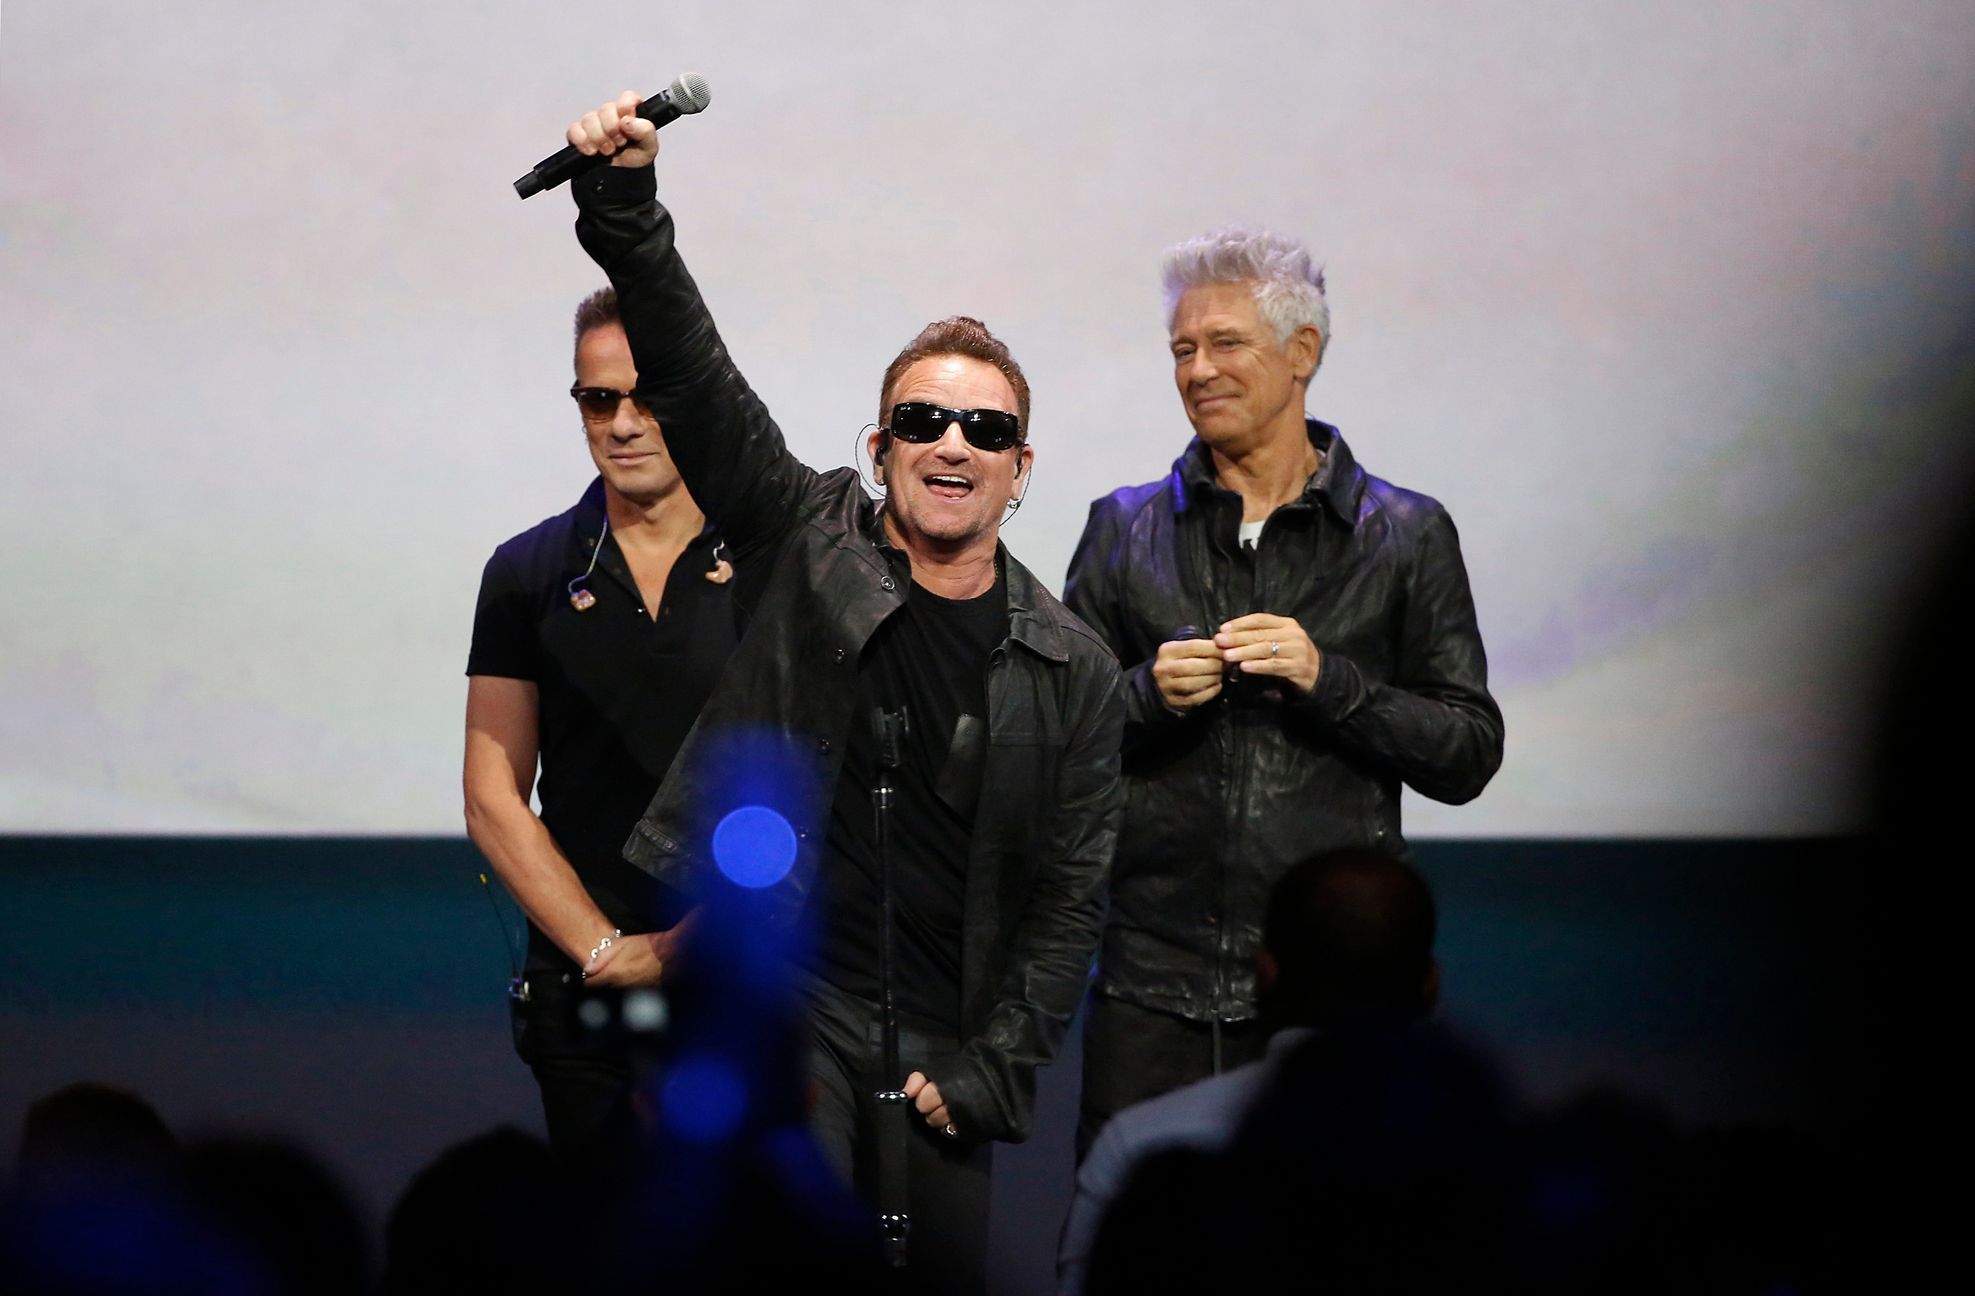 Bono of Irish rock band U2 gestures to the audience after performing at an Apple event at the Flint Center in Cupertino